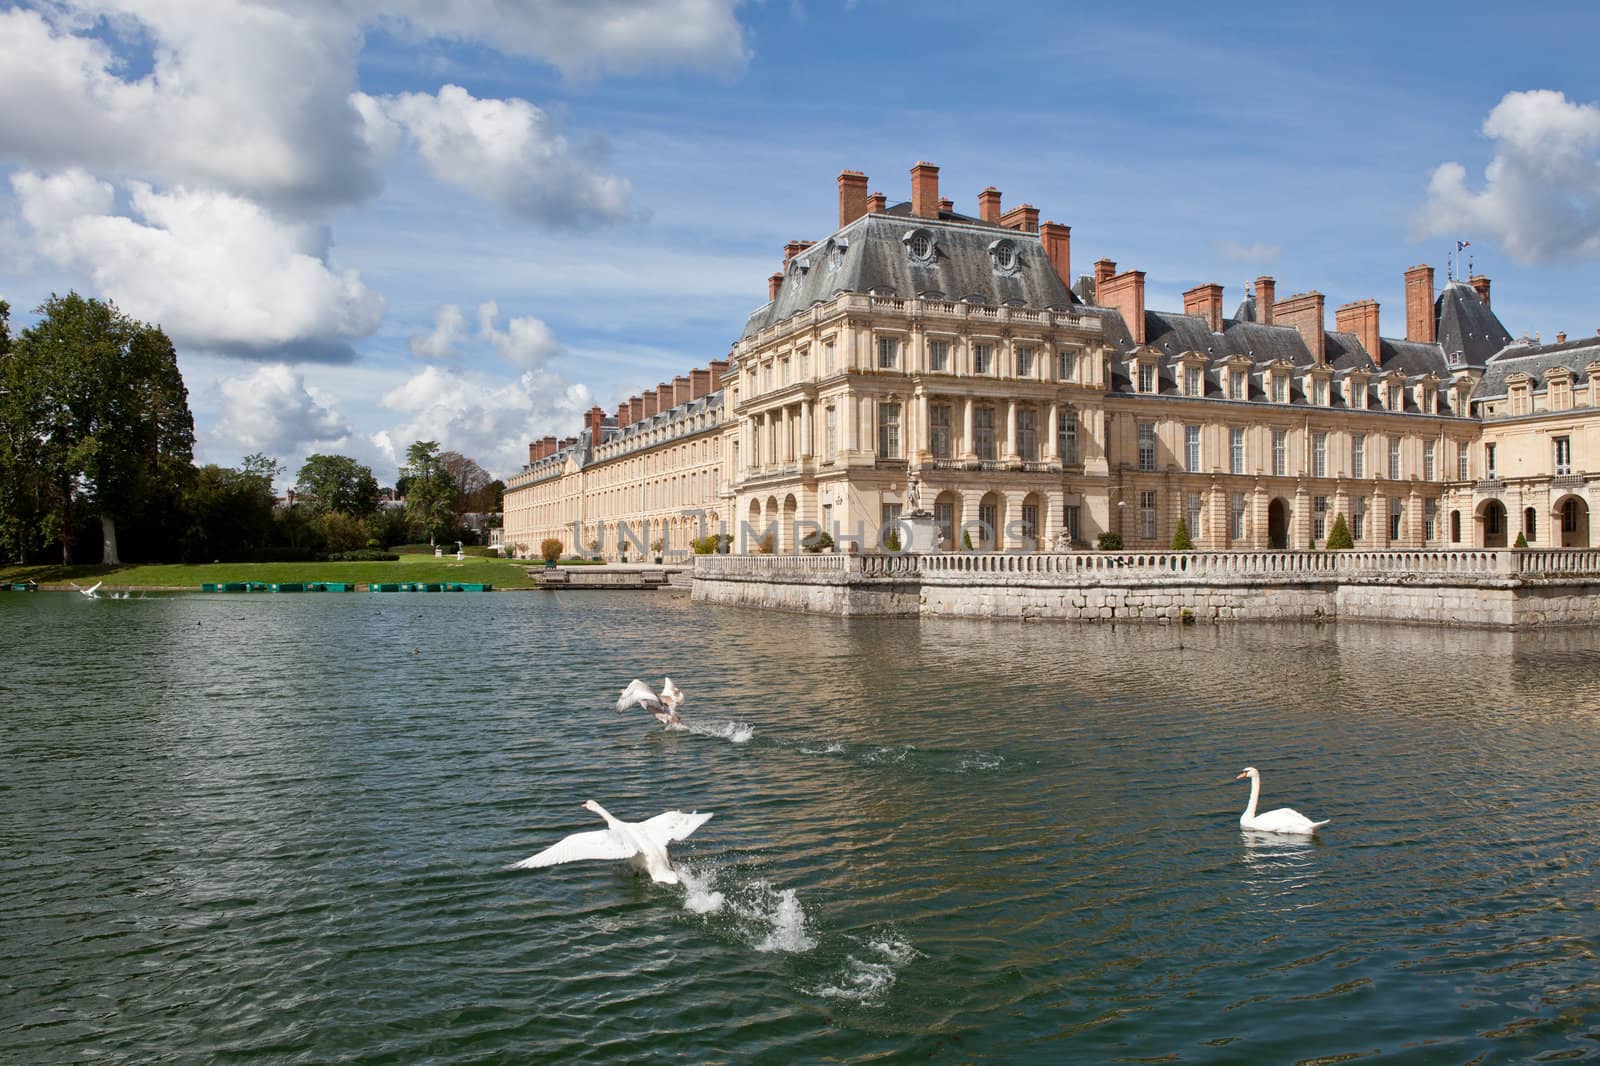 Medieval landmark royal hunting castle Fontainbleau near Paris in France and lake with white swans